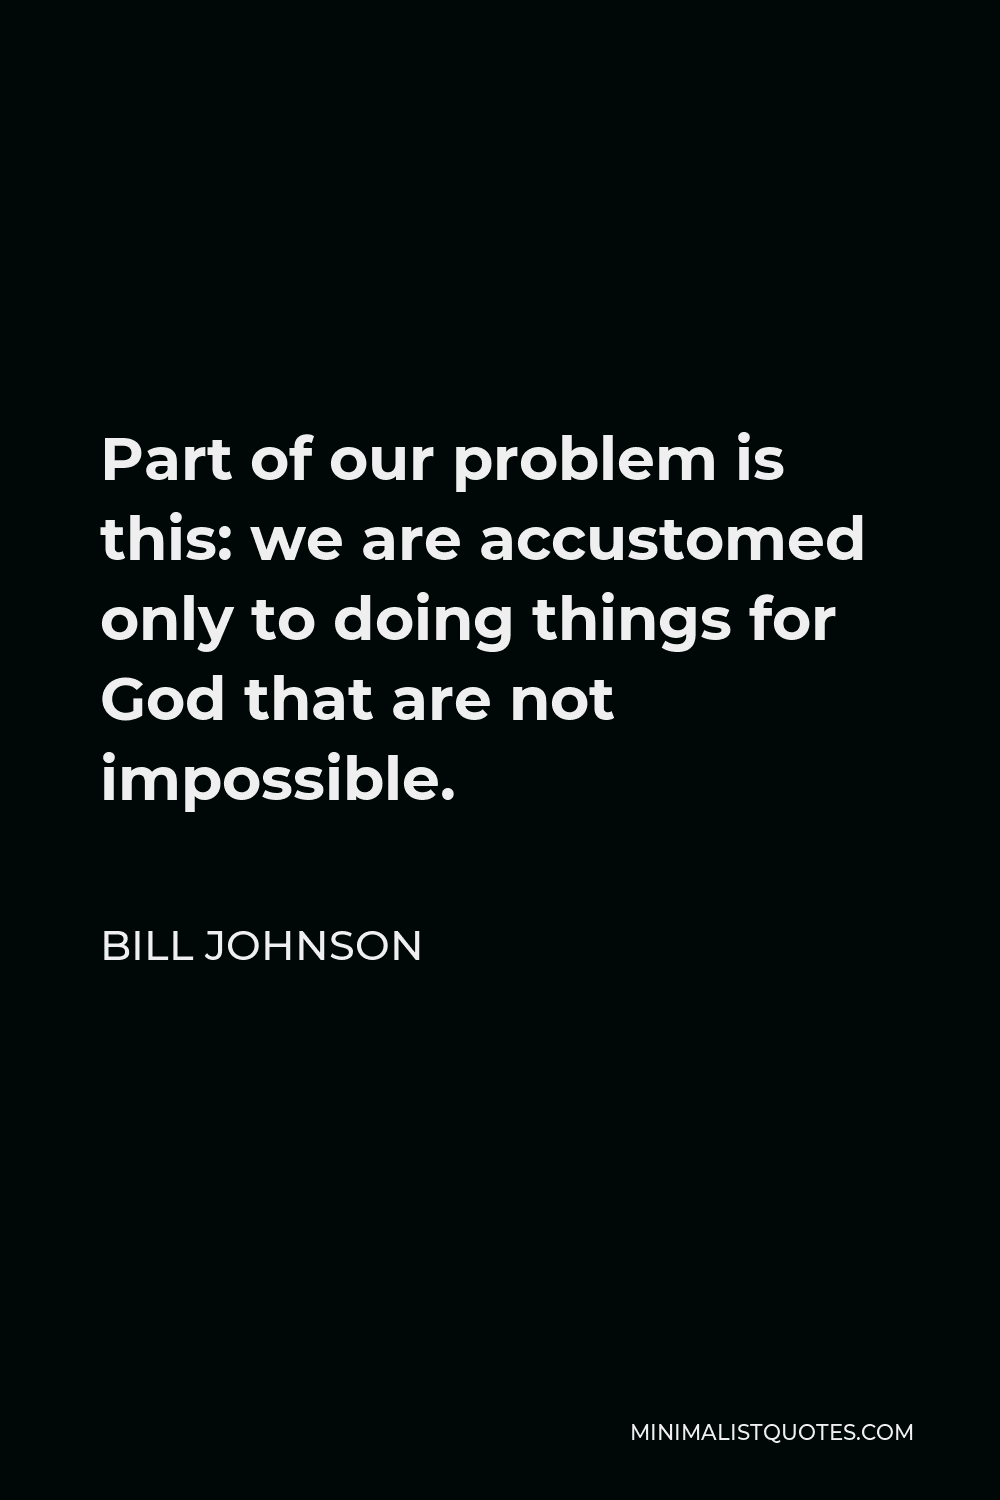 Bill Johnson Quote - Part of our problem is this: we are accustomed only to doing things for God that are not impossible.